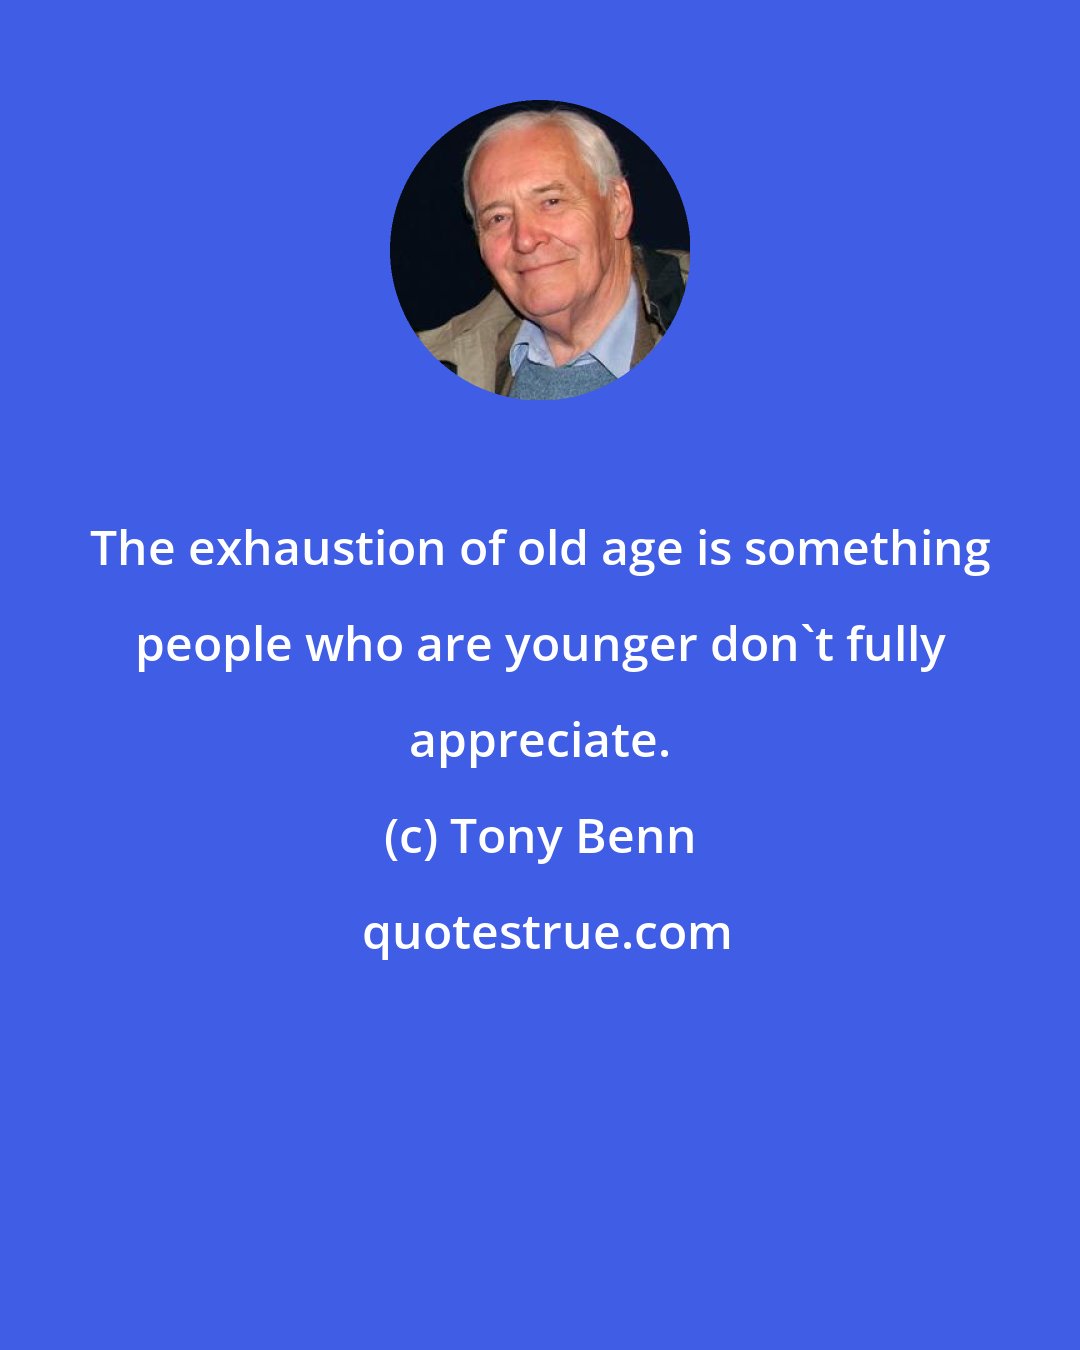 Tony Benn: The exhaustion of old age is something people who are younger don't fully appreciate.